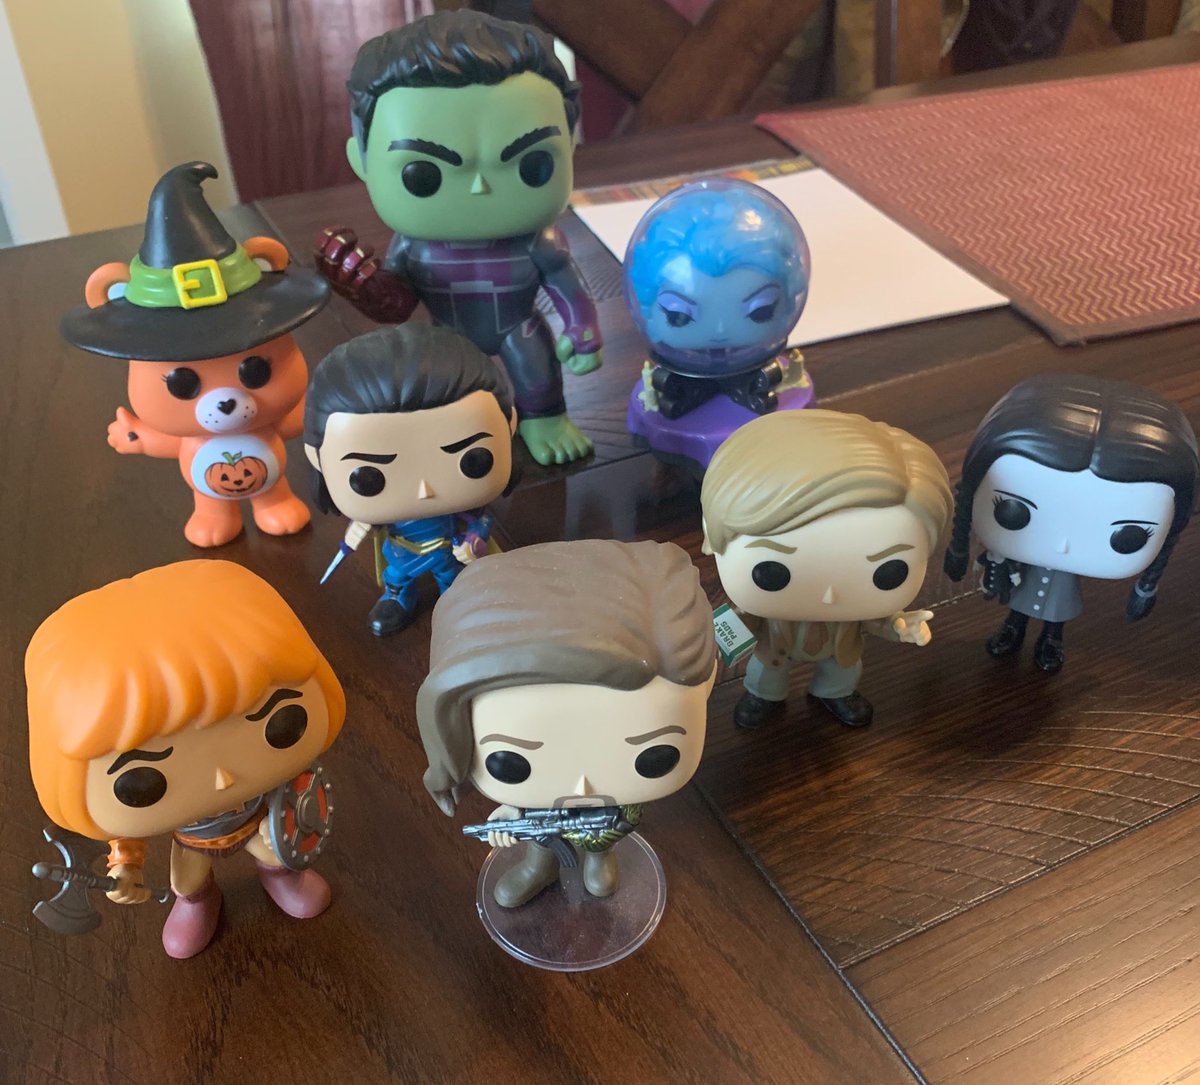 Had a really good staff meeting this morning #toyshots #funkopop #workingfromhome